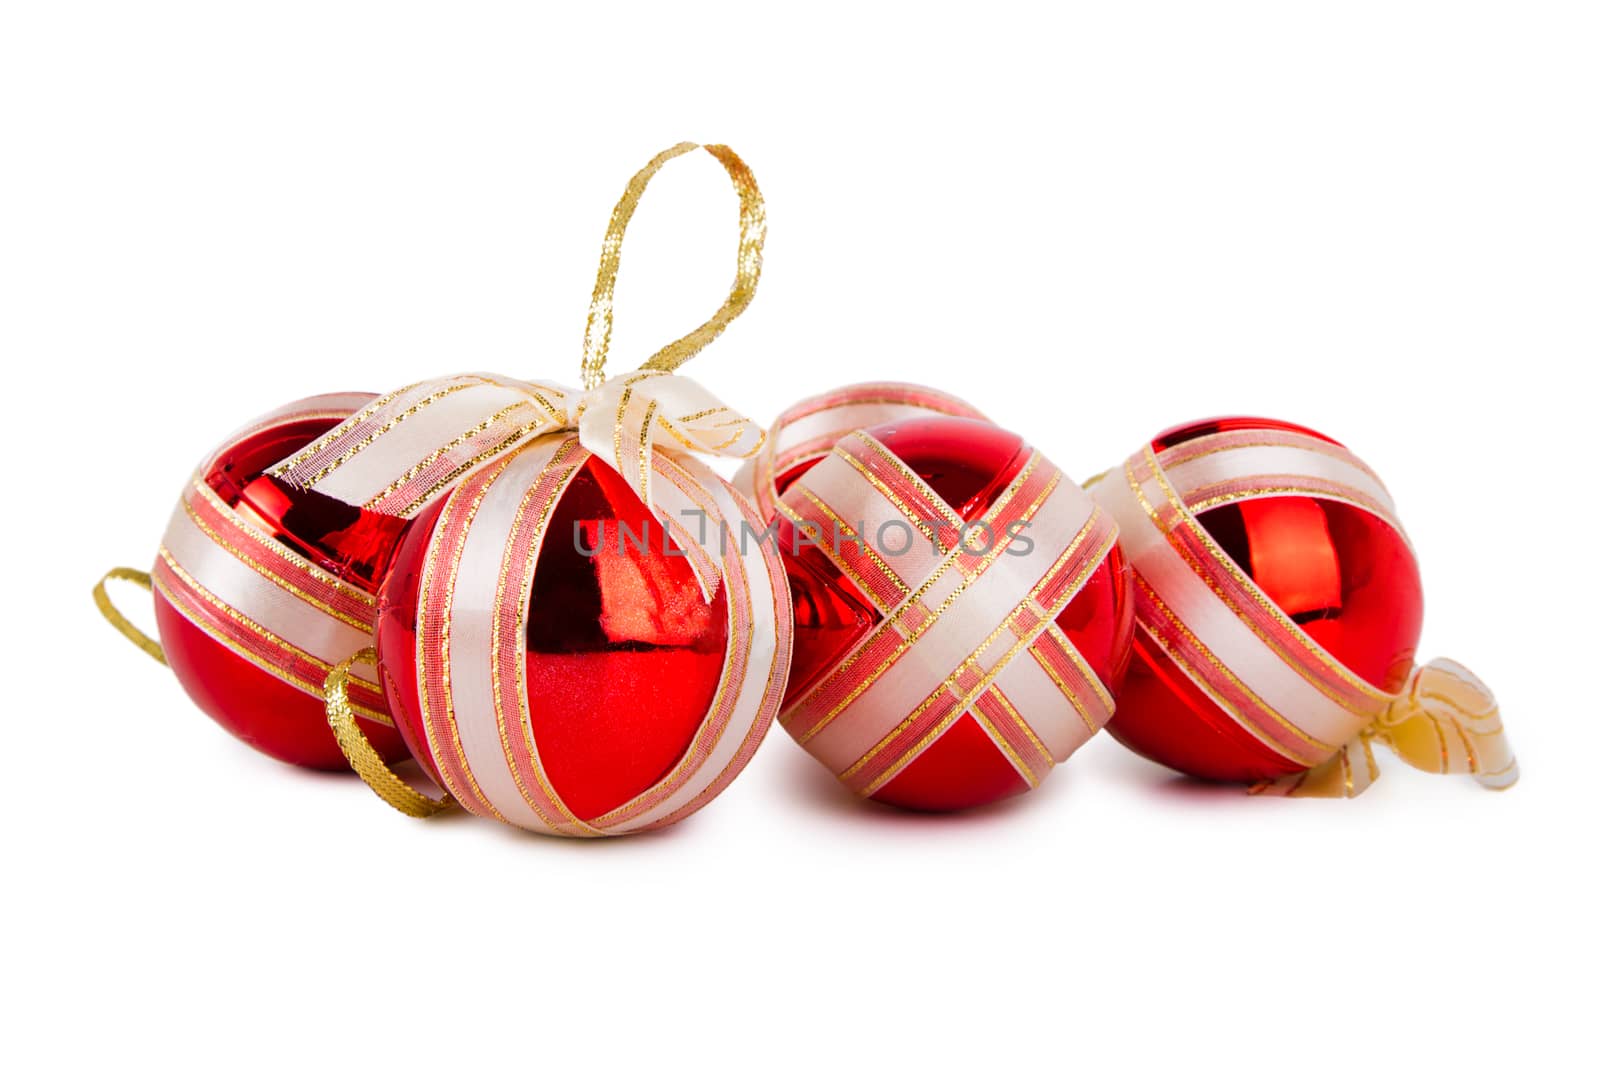 Red Christmas balls isolated on a white background